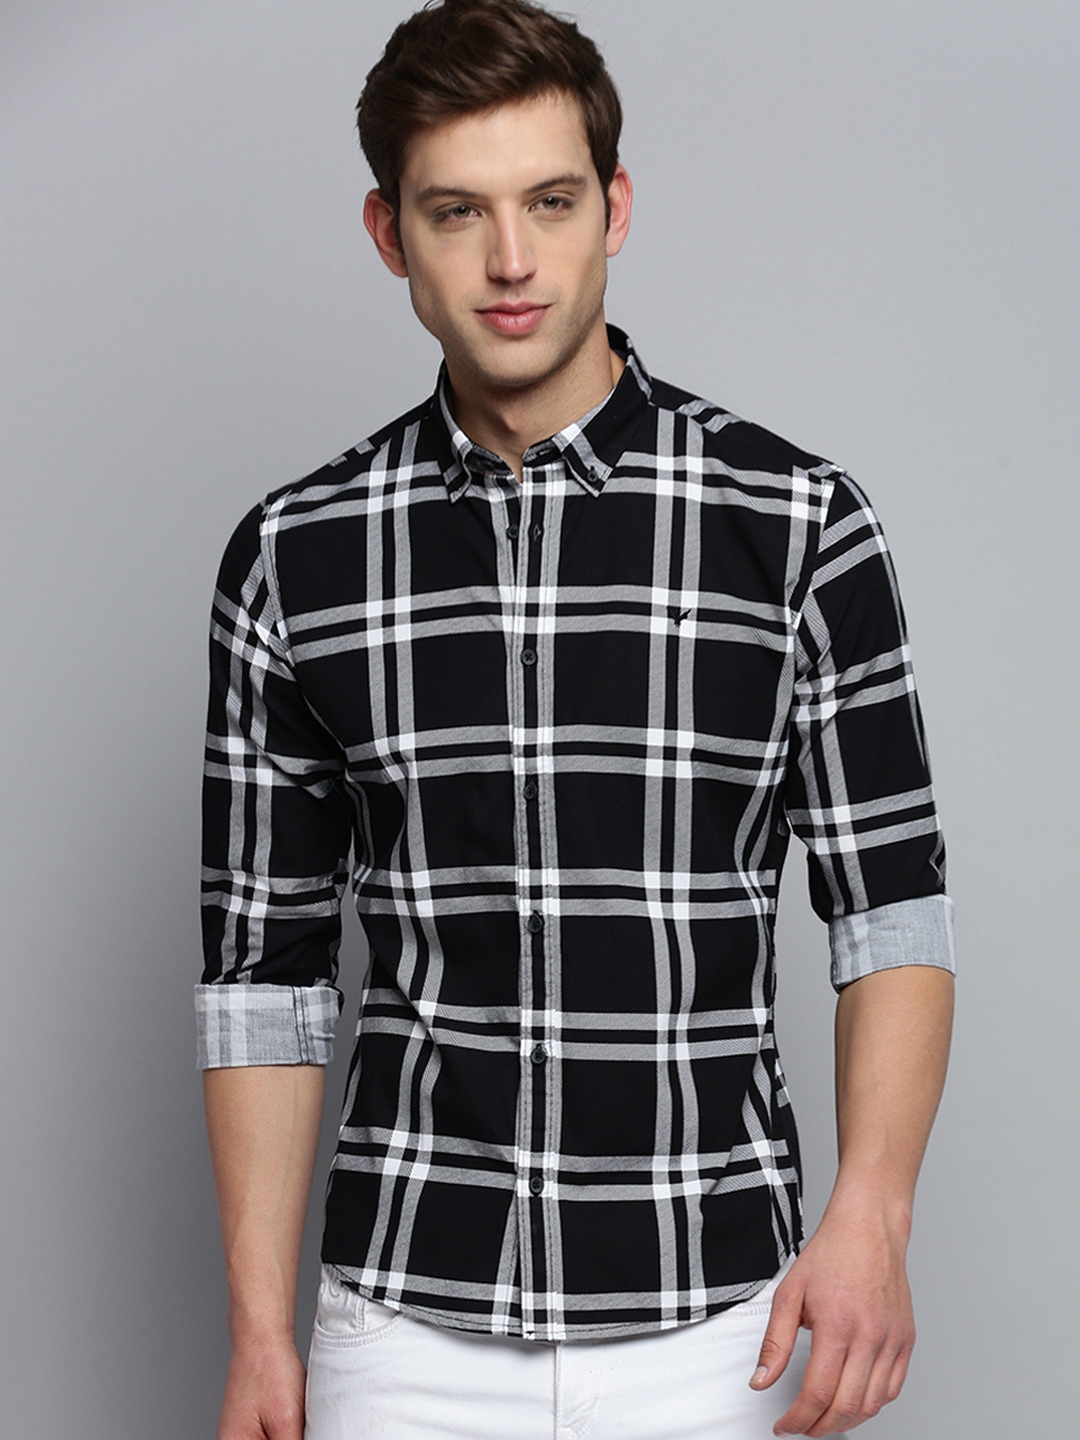 Showoff | SHOWOFF Men's Spread Collar Checked Black Classic Shirt 1